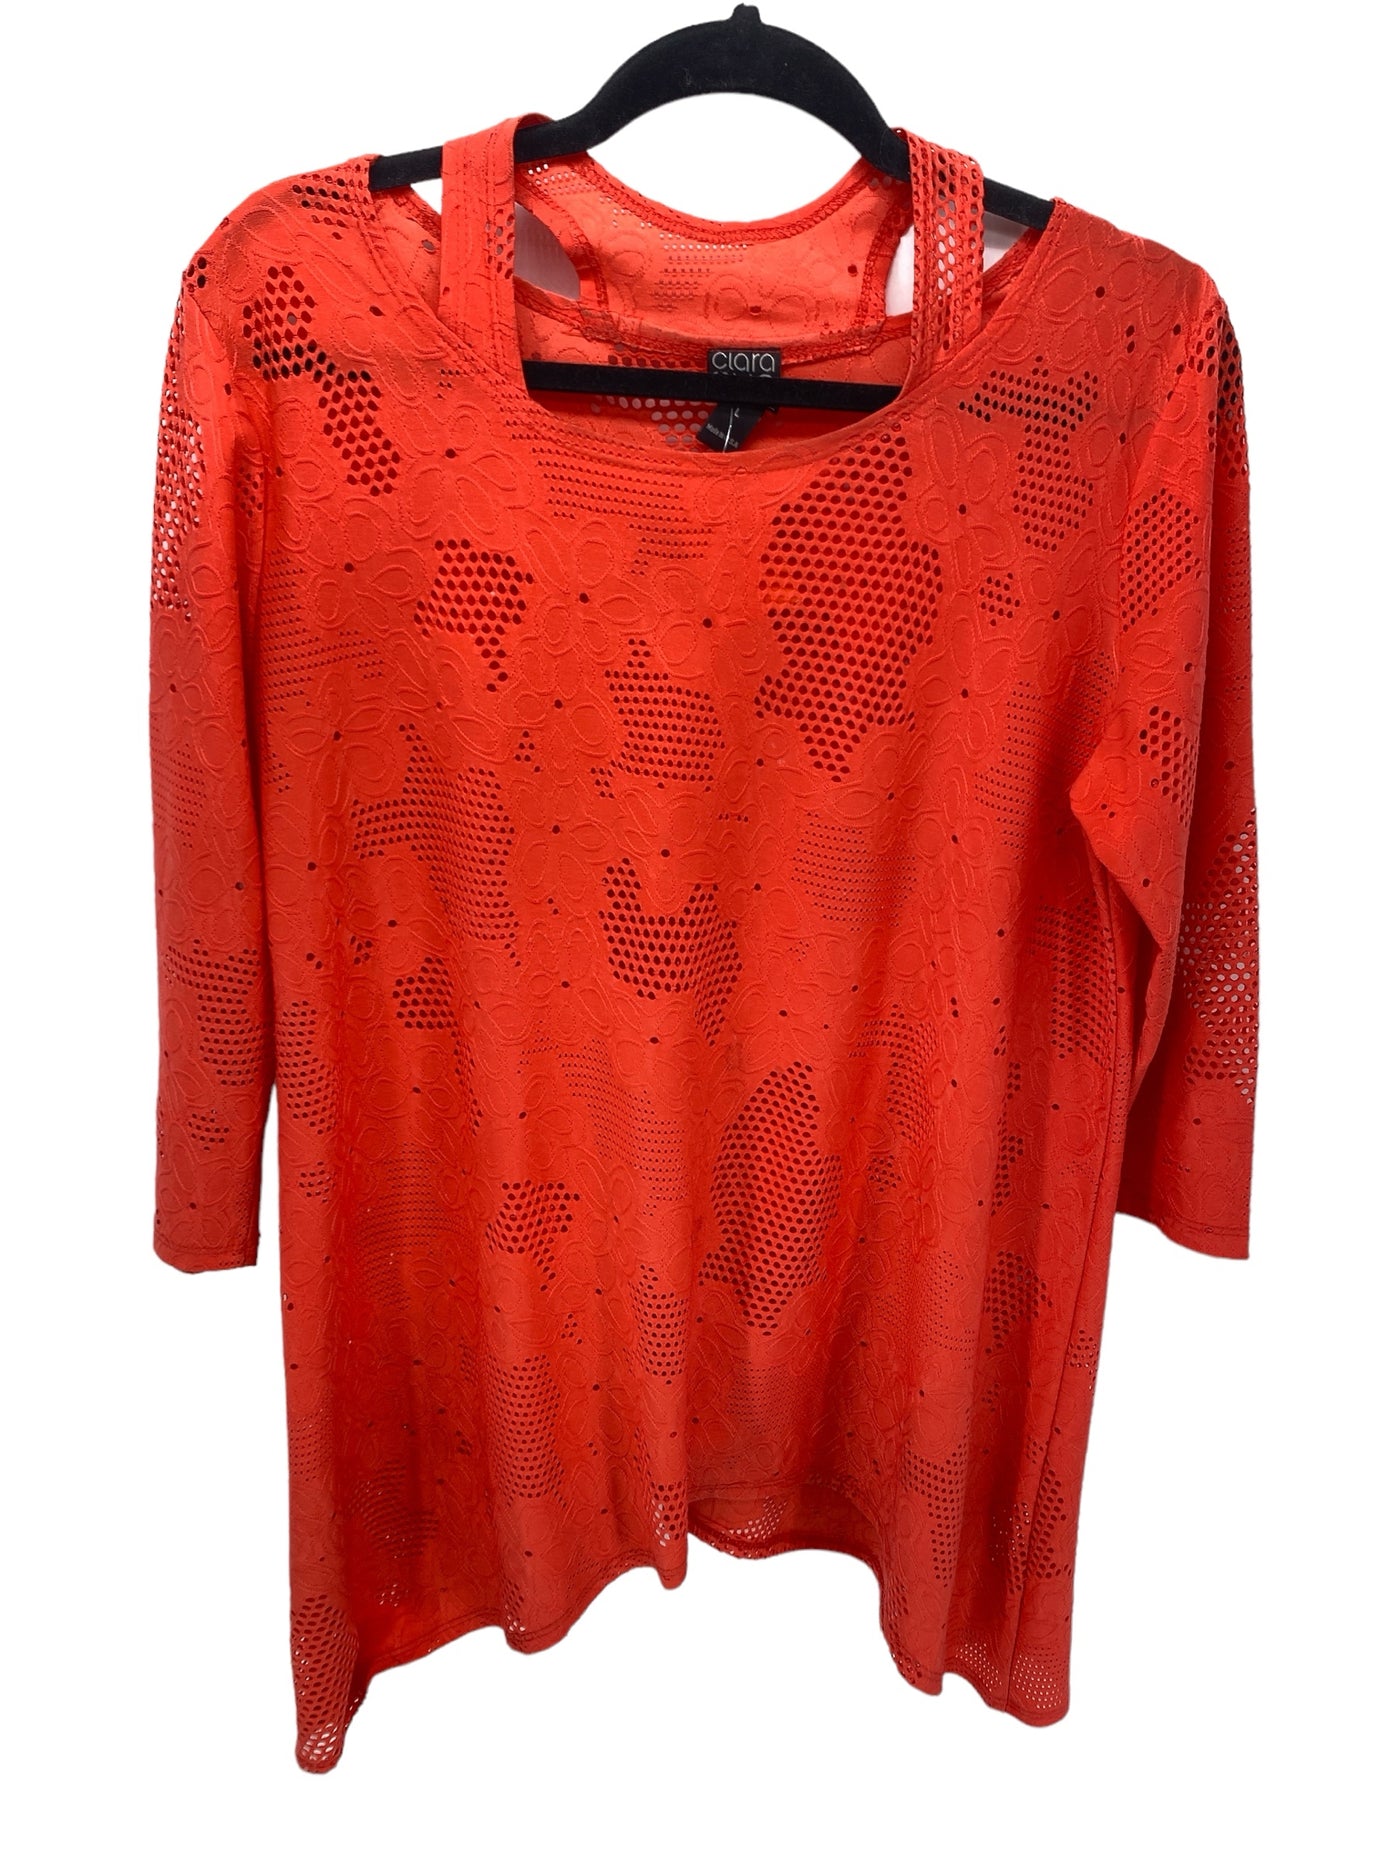 Clara Sun Woo Misses Size Large Coral LS Casual